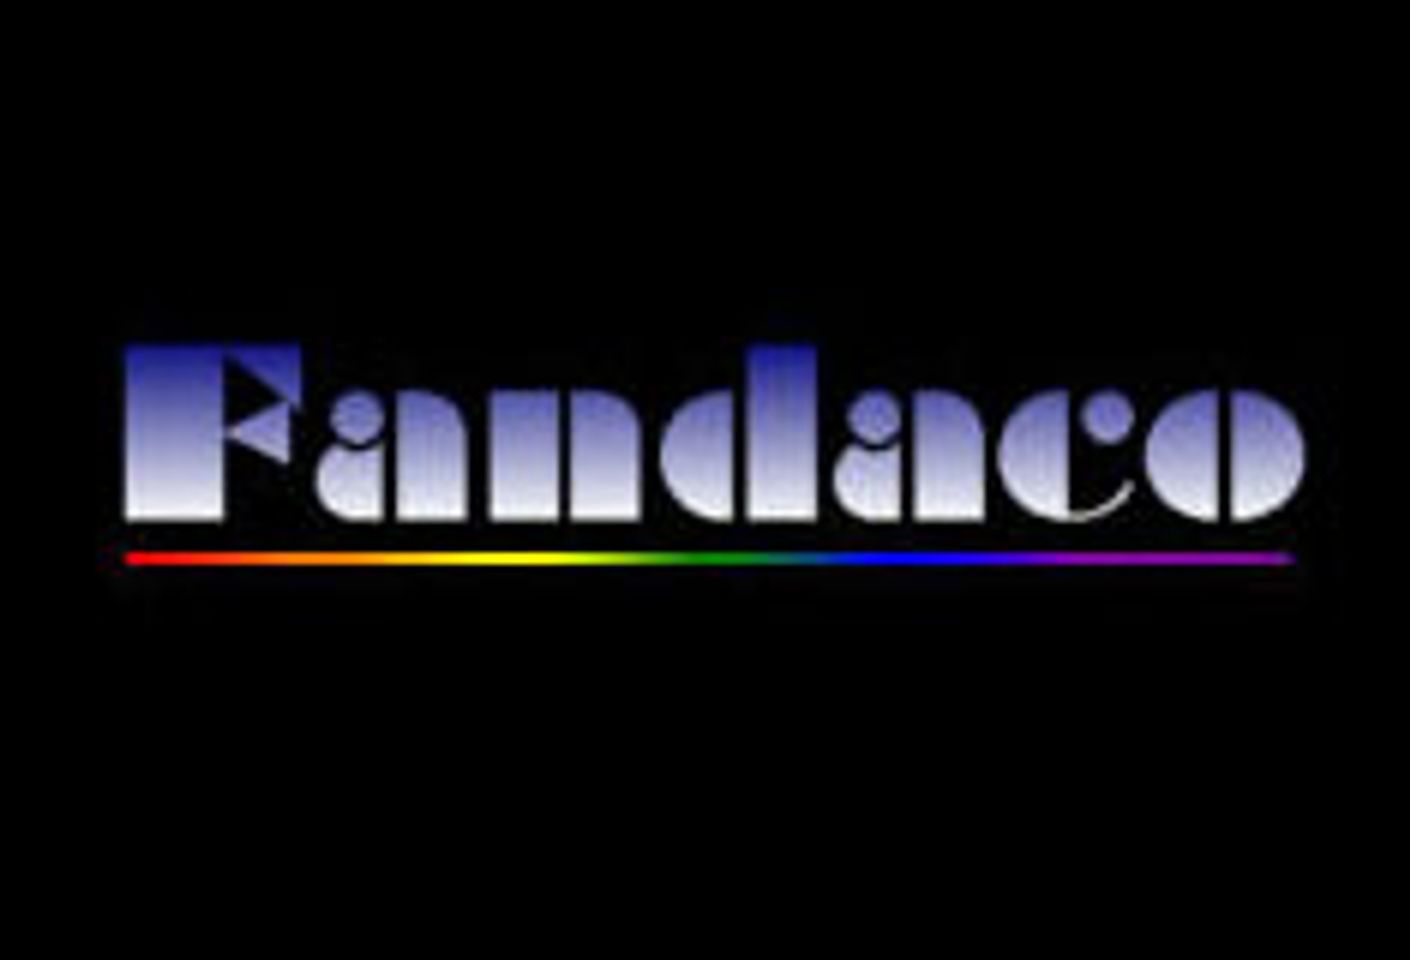 Fandaco Launches Gay Twink Wholesale DVD Division